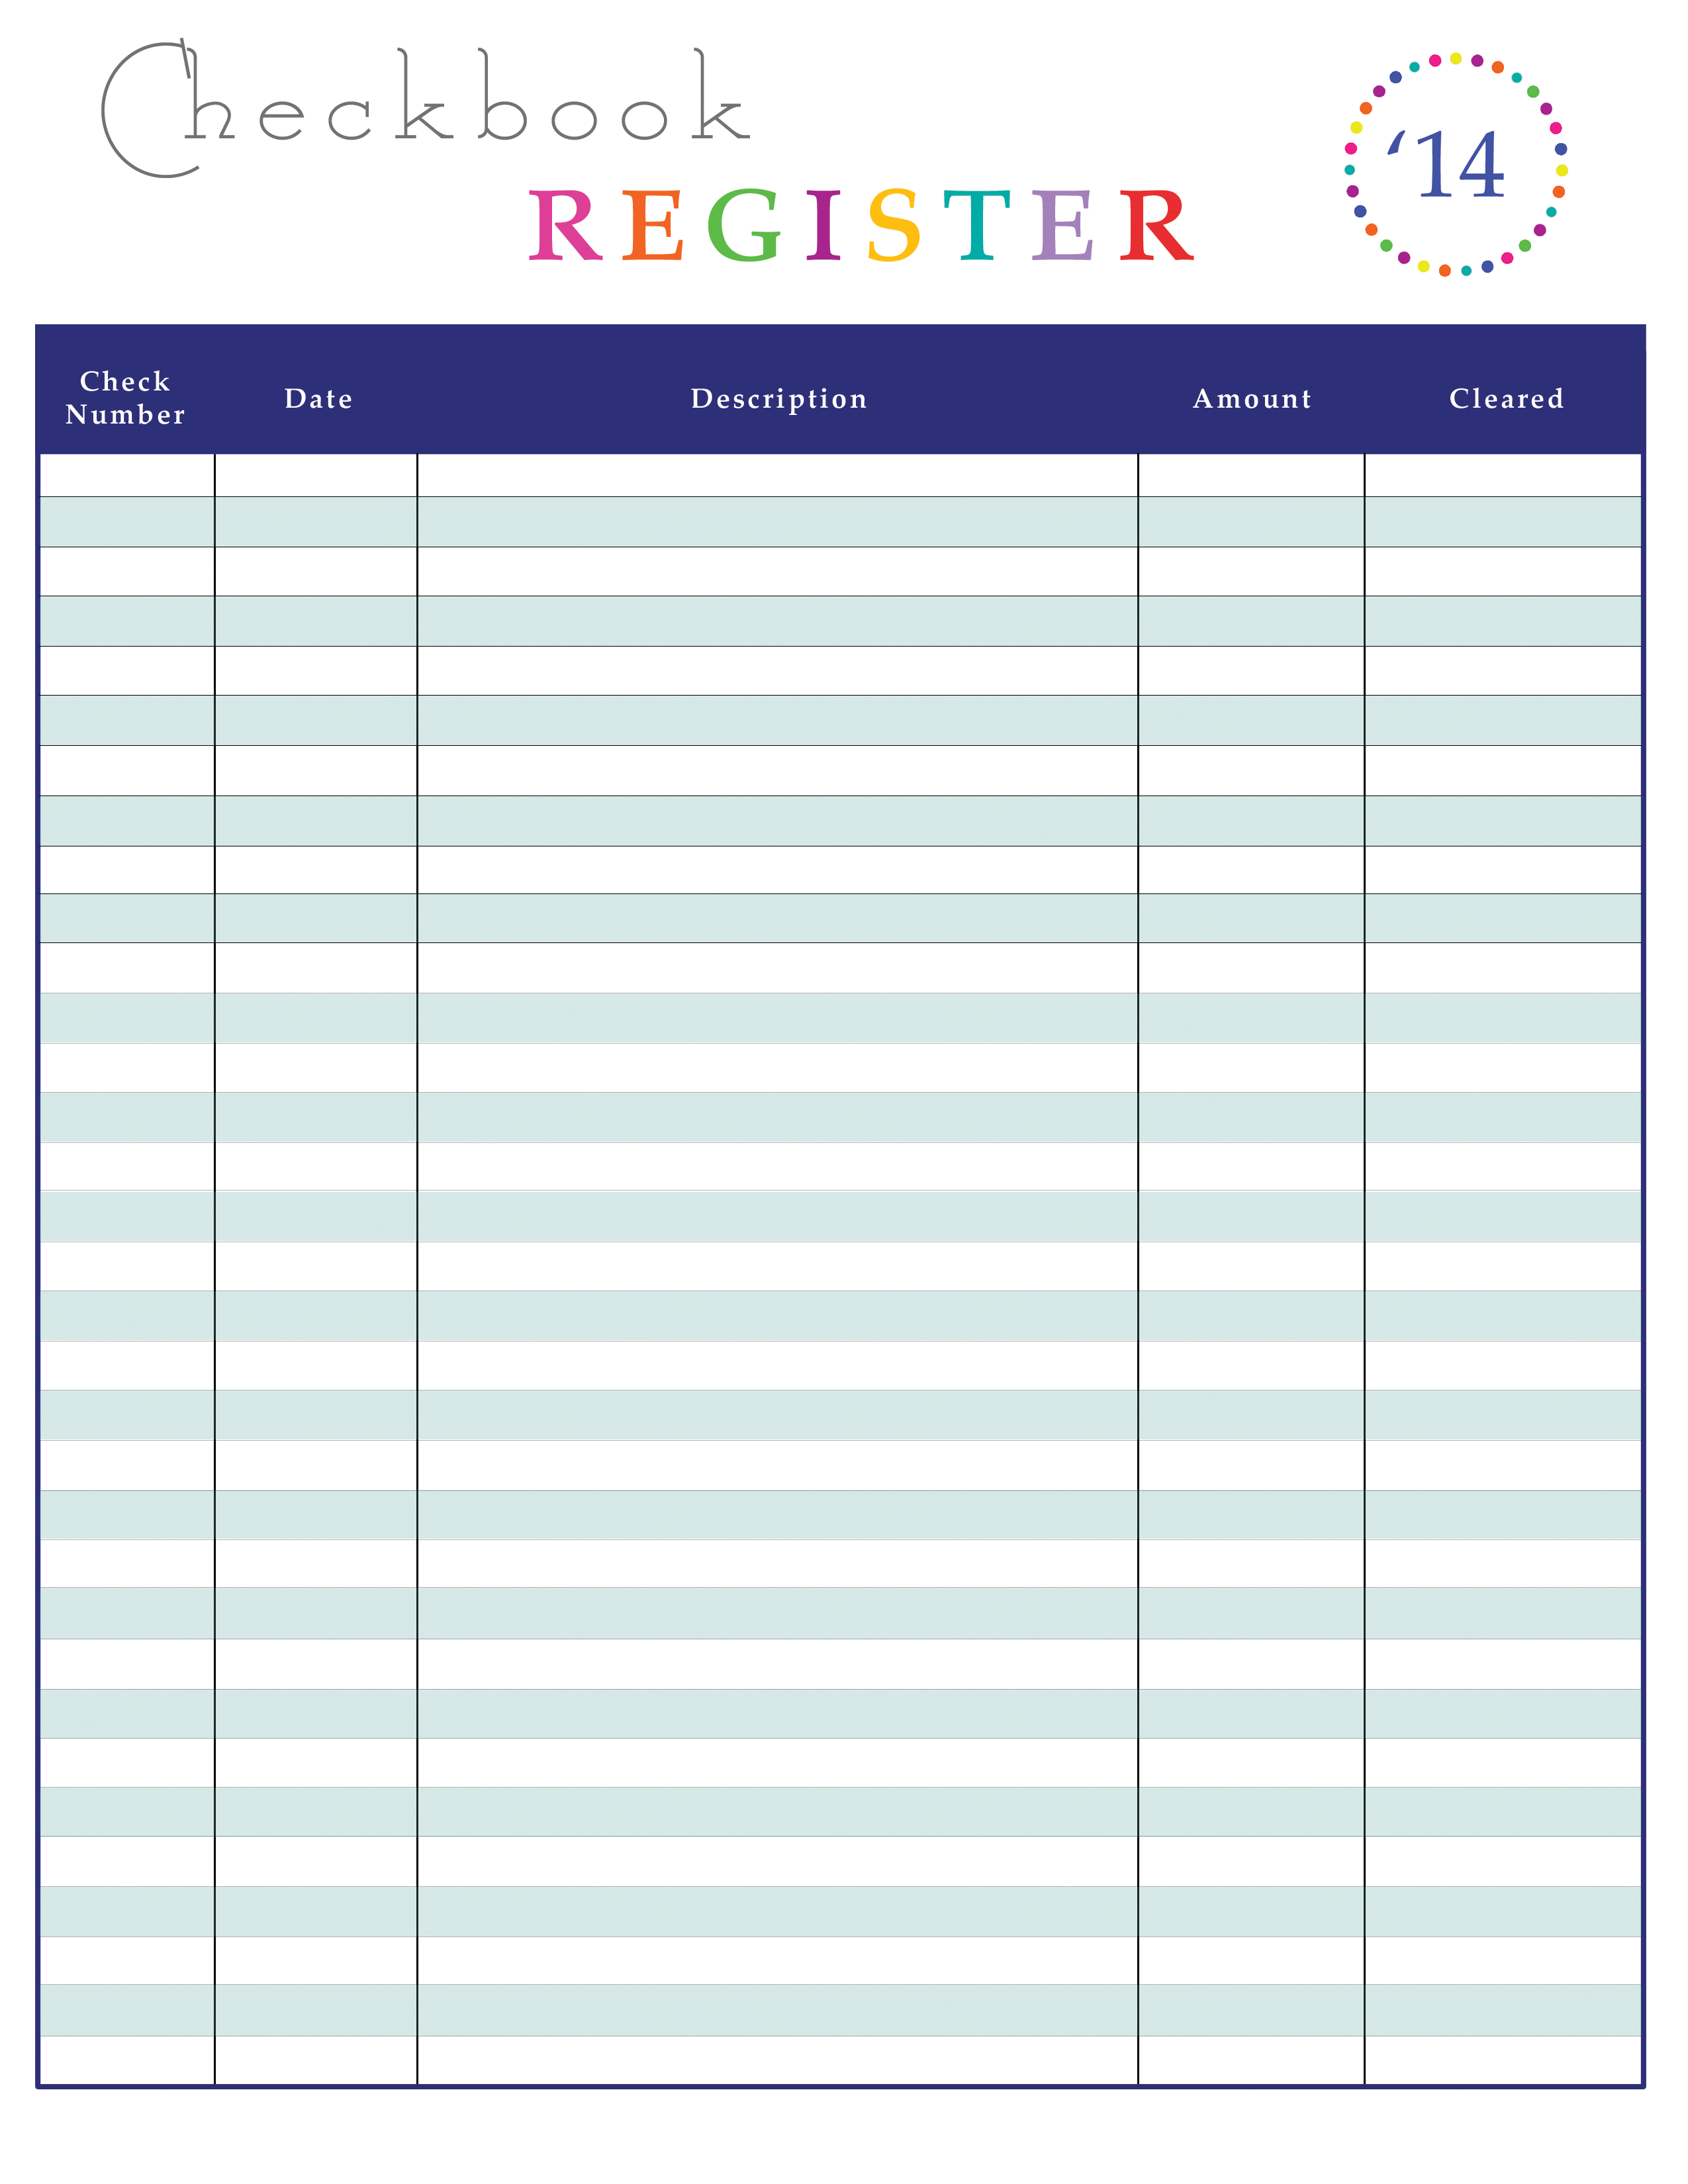 7-best-images-of-free-printable-check-transaction-register-printable